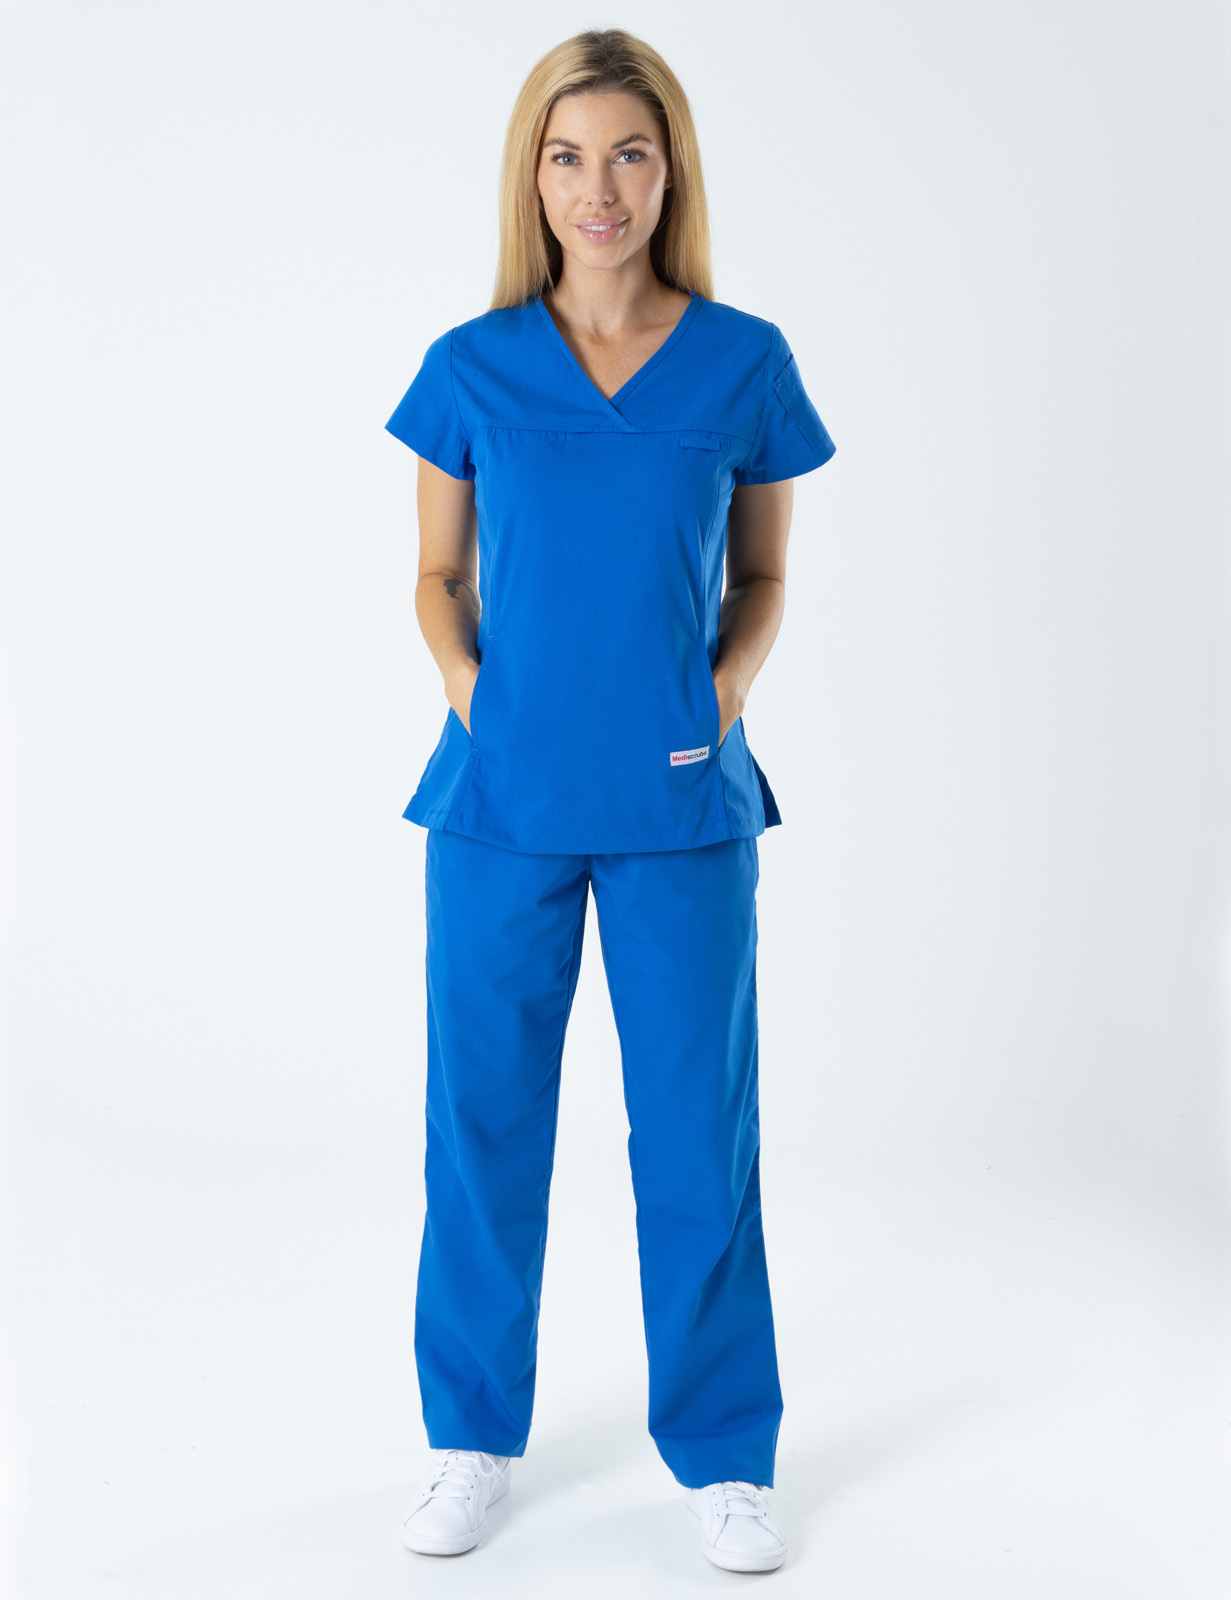 Women's Fit Solid Scrub Top - Royal - 3X Large